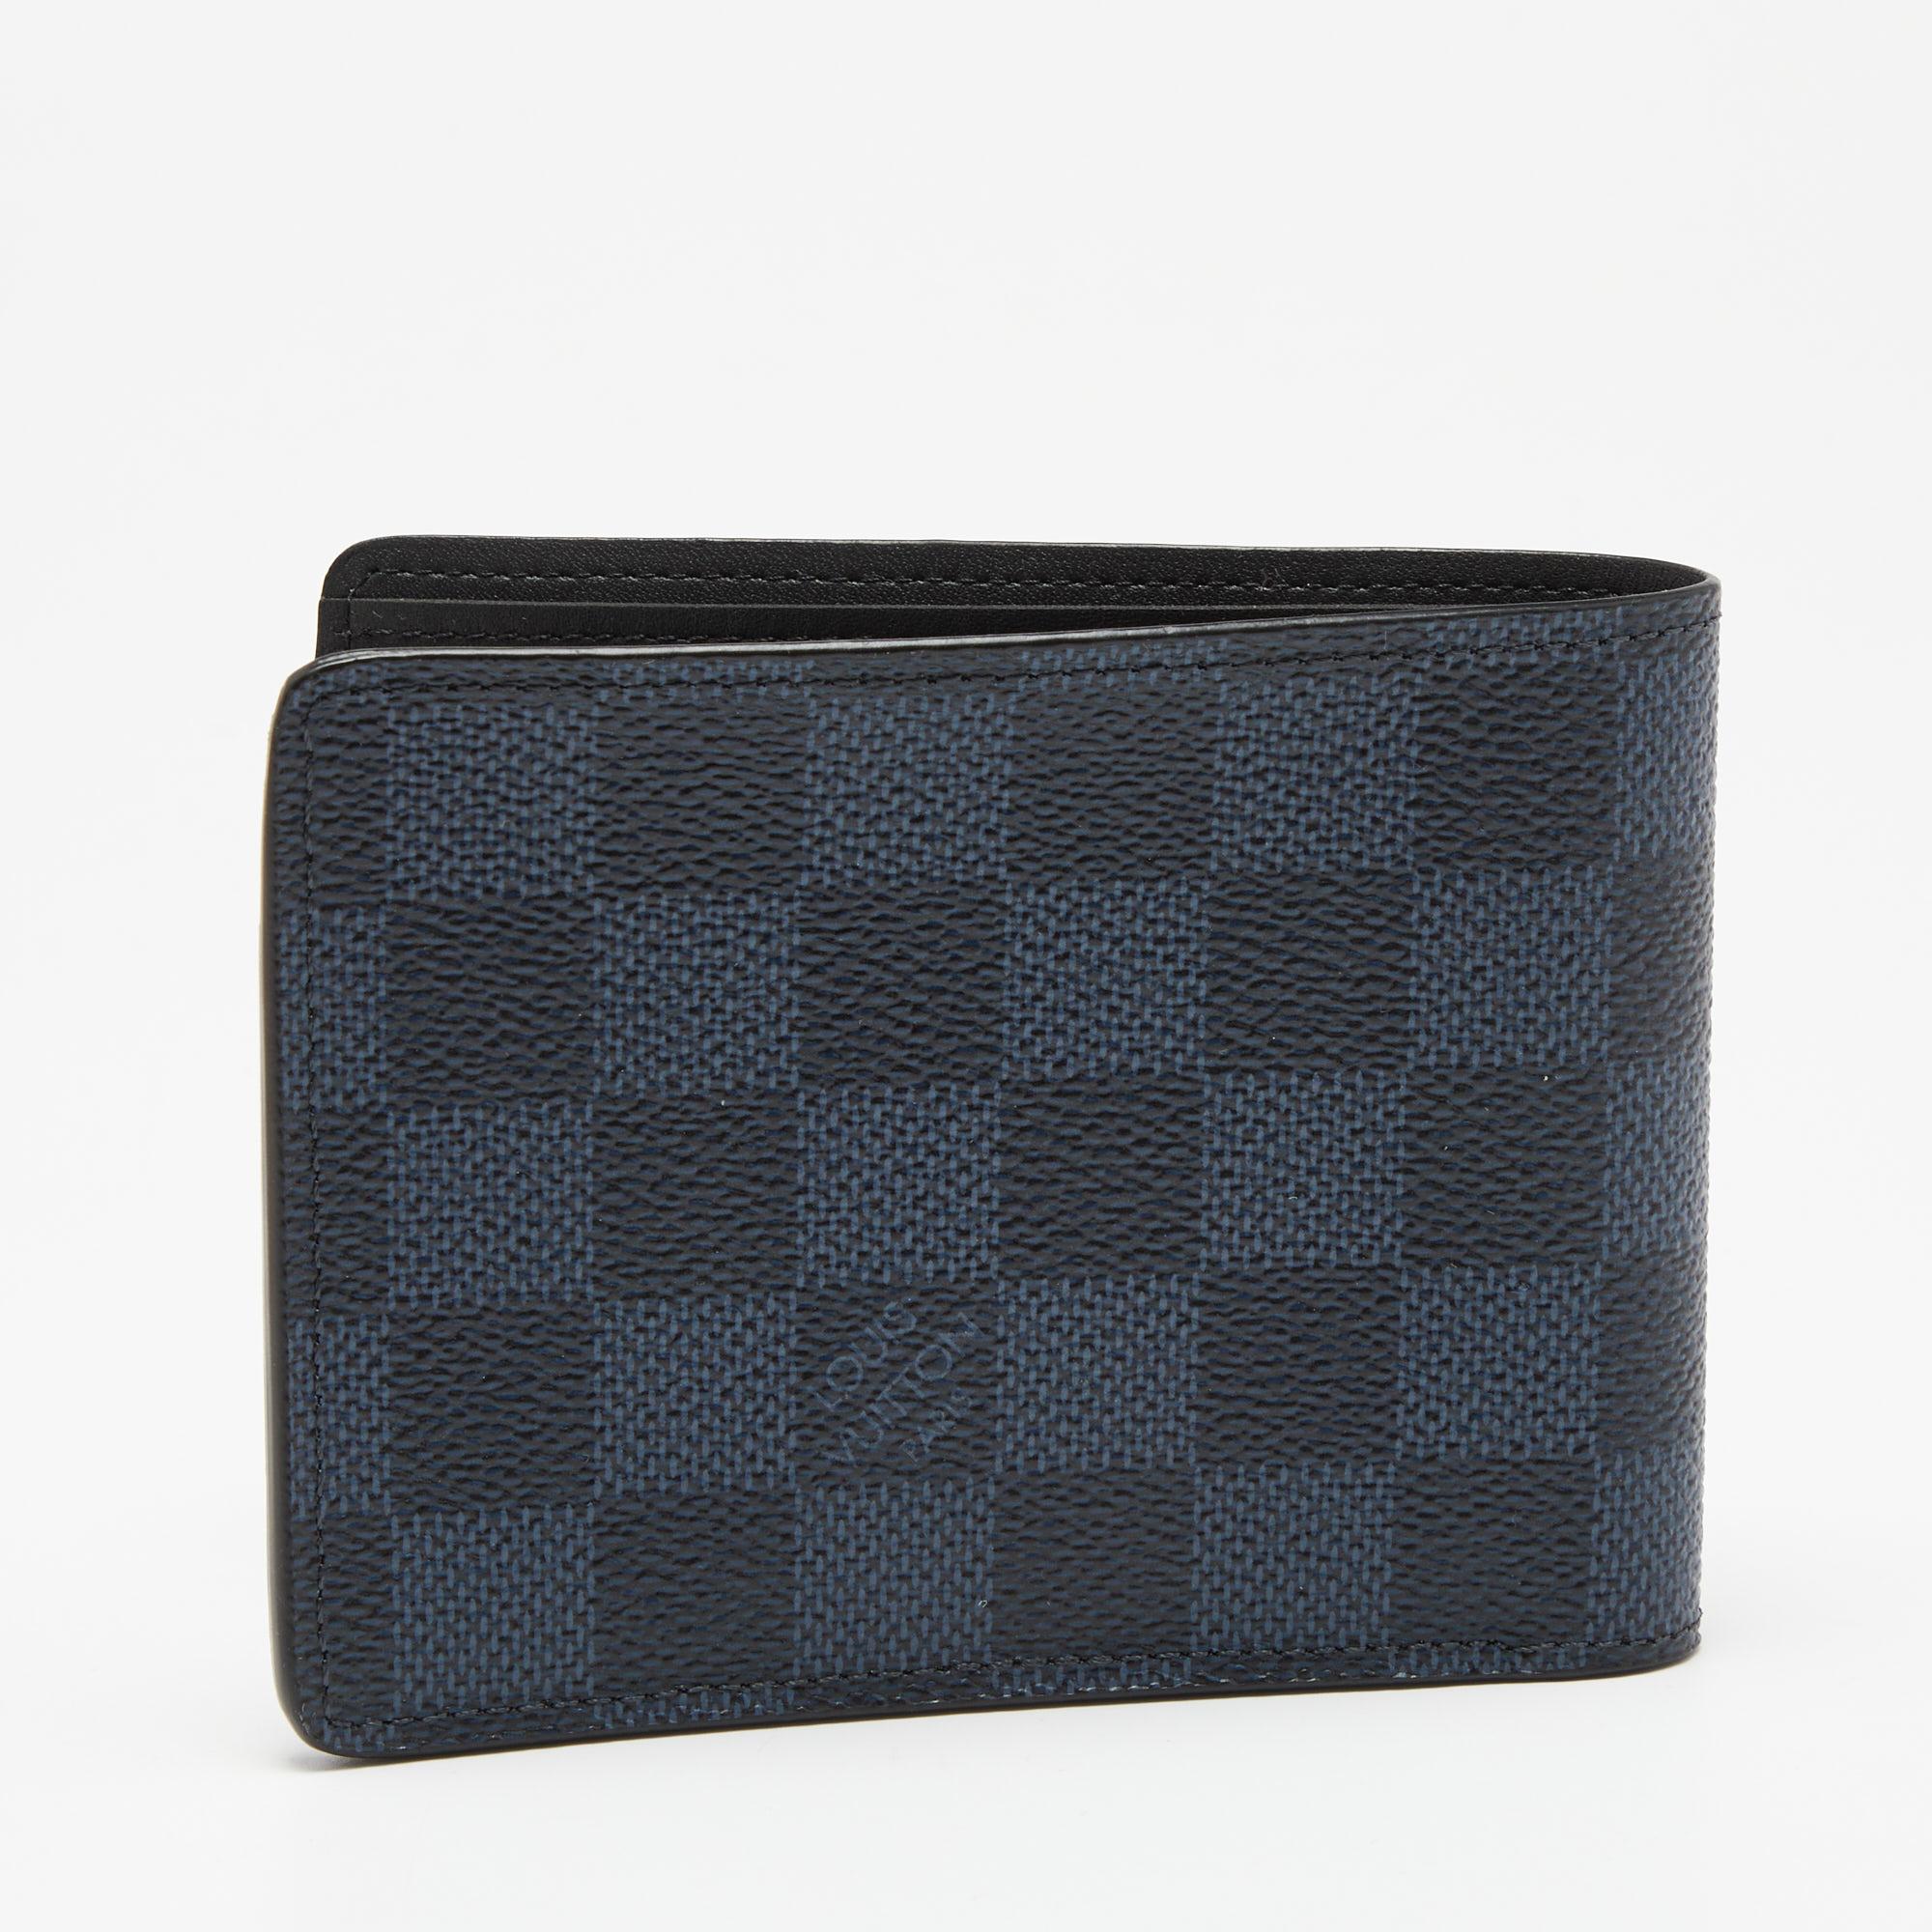 Celebrating its roots, this Louis Vuitton Canvas Malletier Paris 1854 wallet embodies a fresh feel. It will add an extra edge to your outfit and its compact design makes it easy to carry around. Made from the Damier Graphite canvas, its